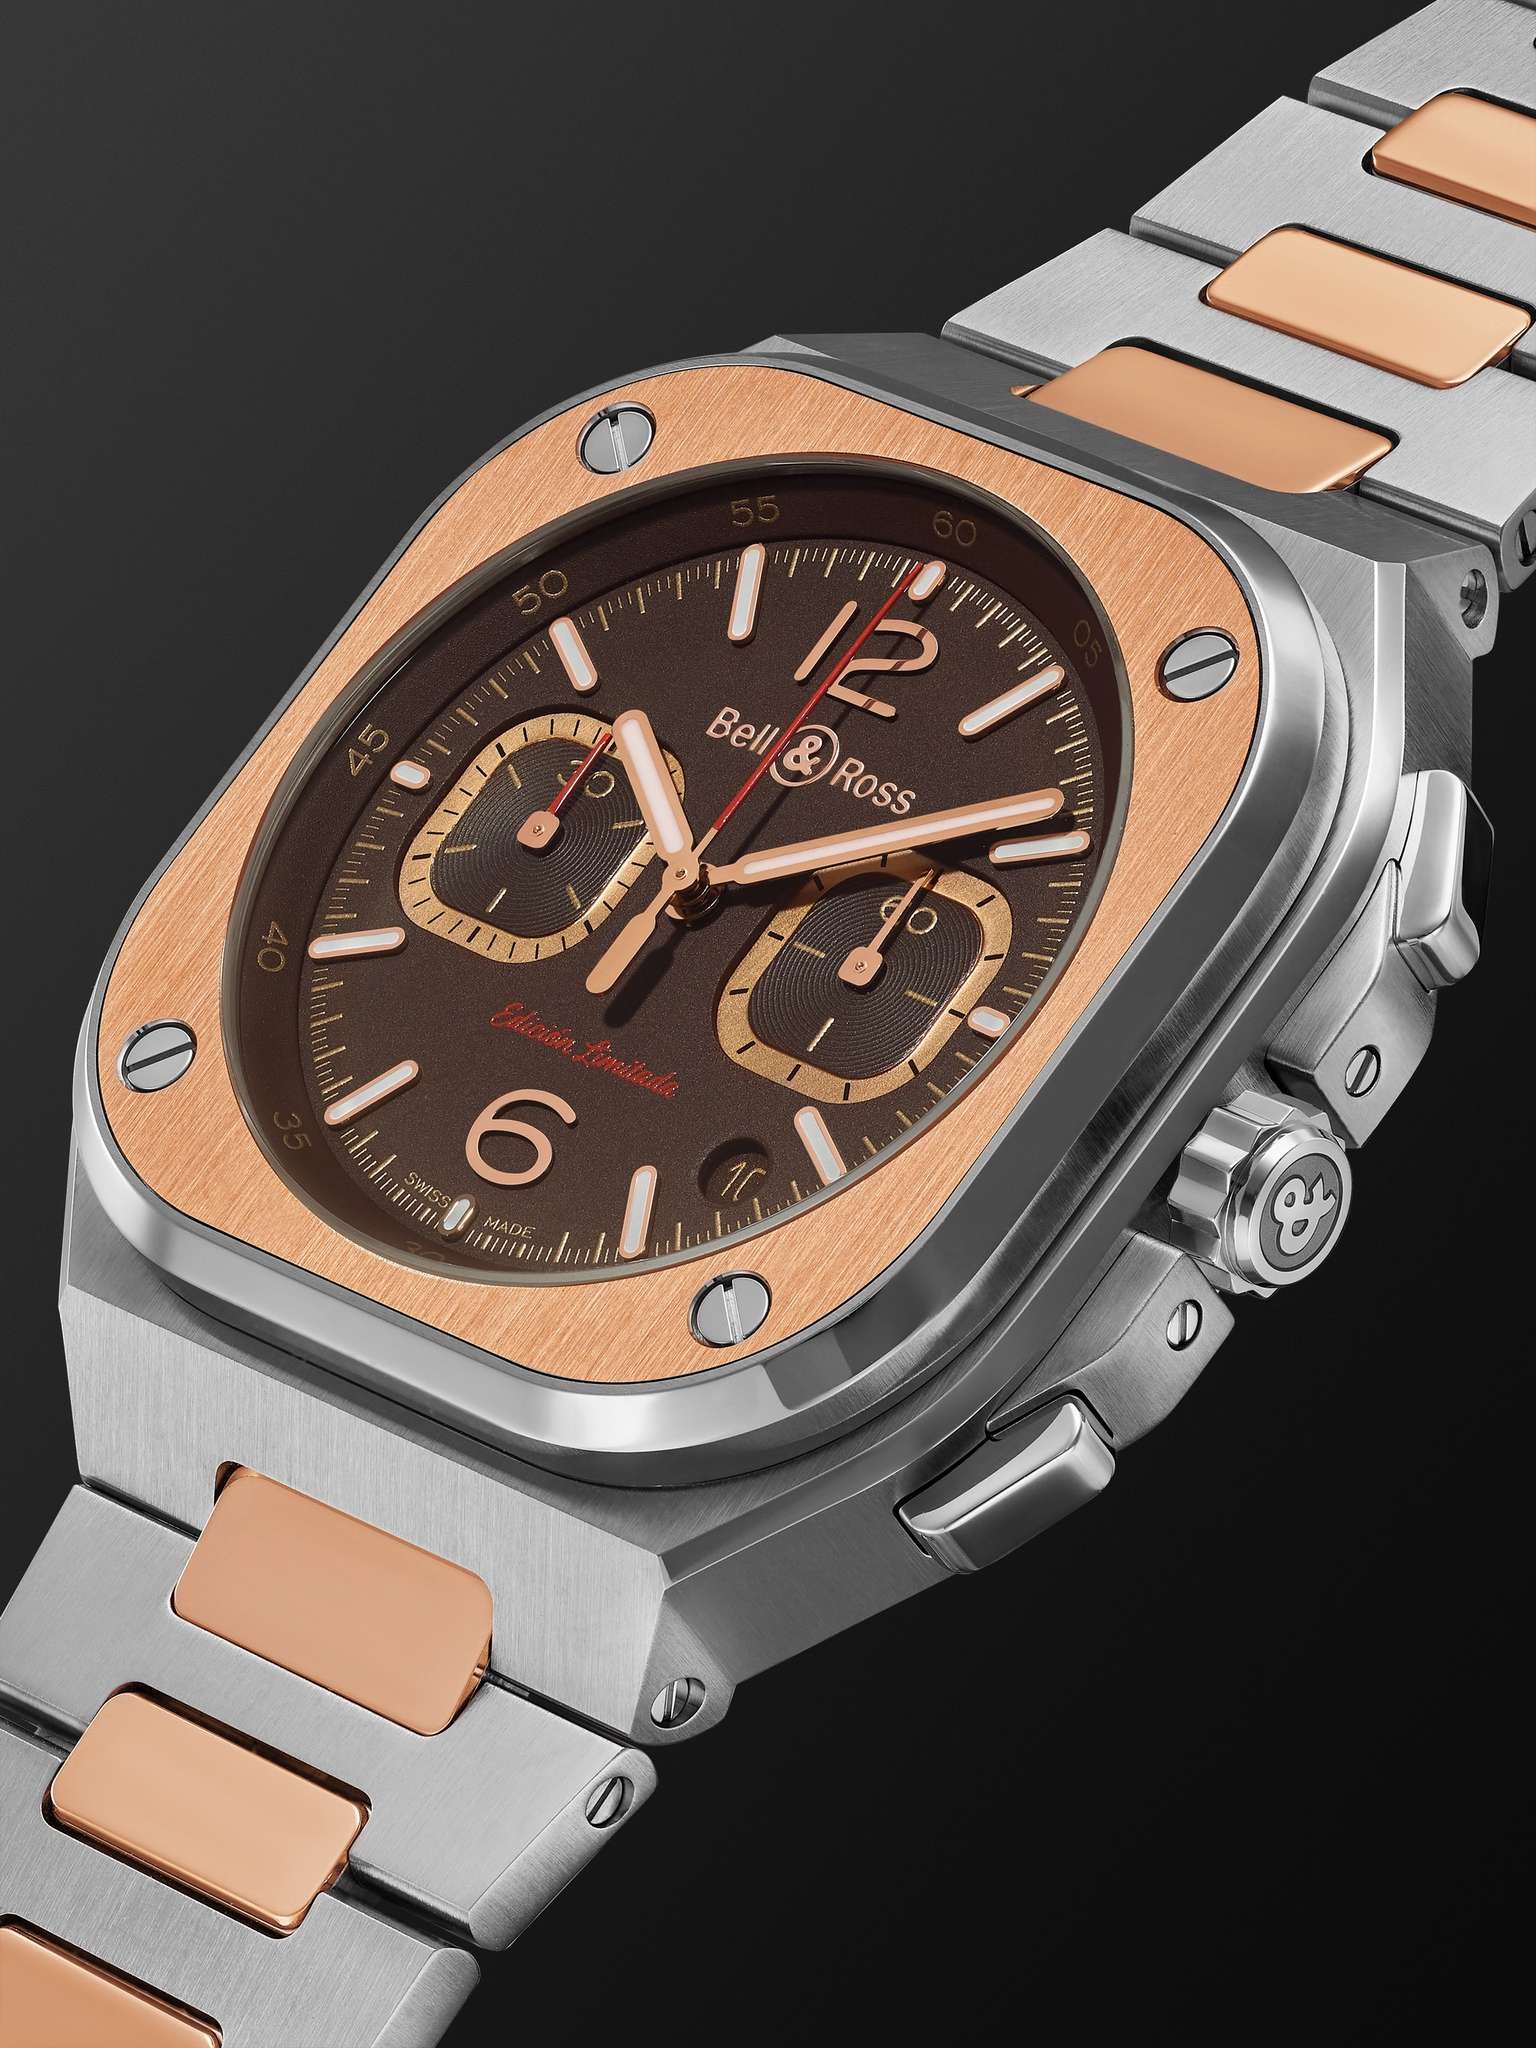 BR 05 Limited Edition Automatic Chronograph 42mm Stainless Steel and Rose Gold Watch, Ref. No. BR05C - 6